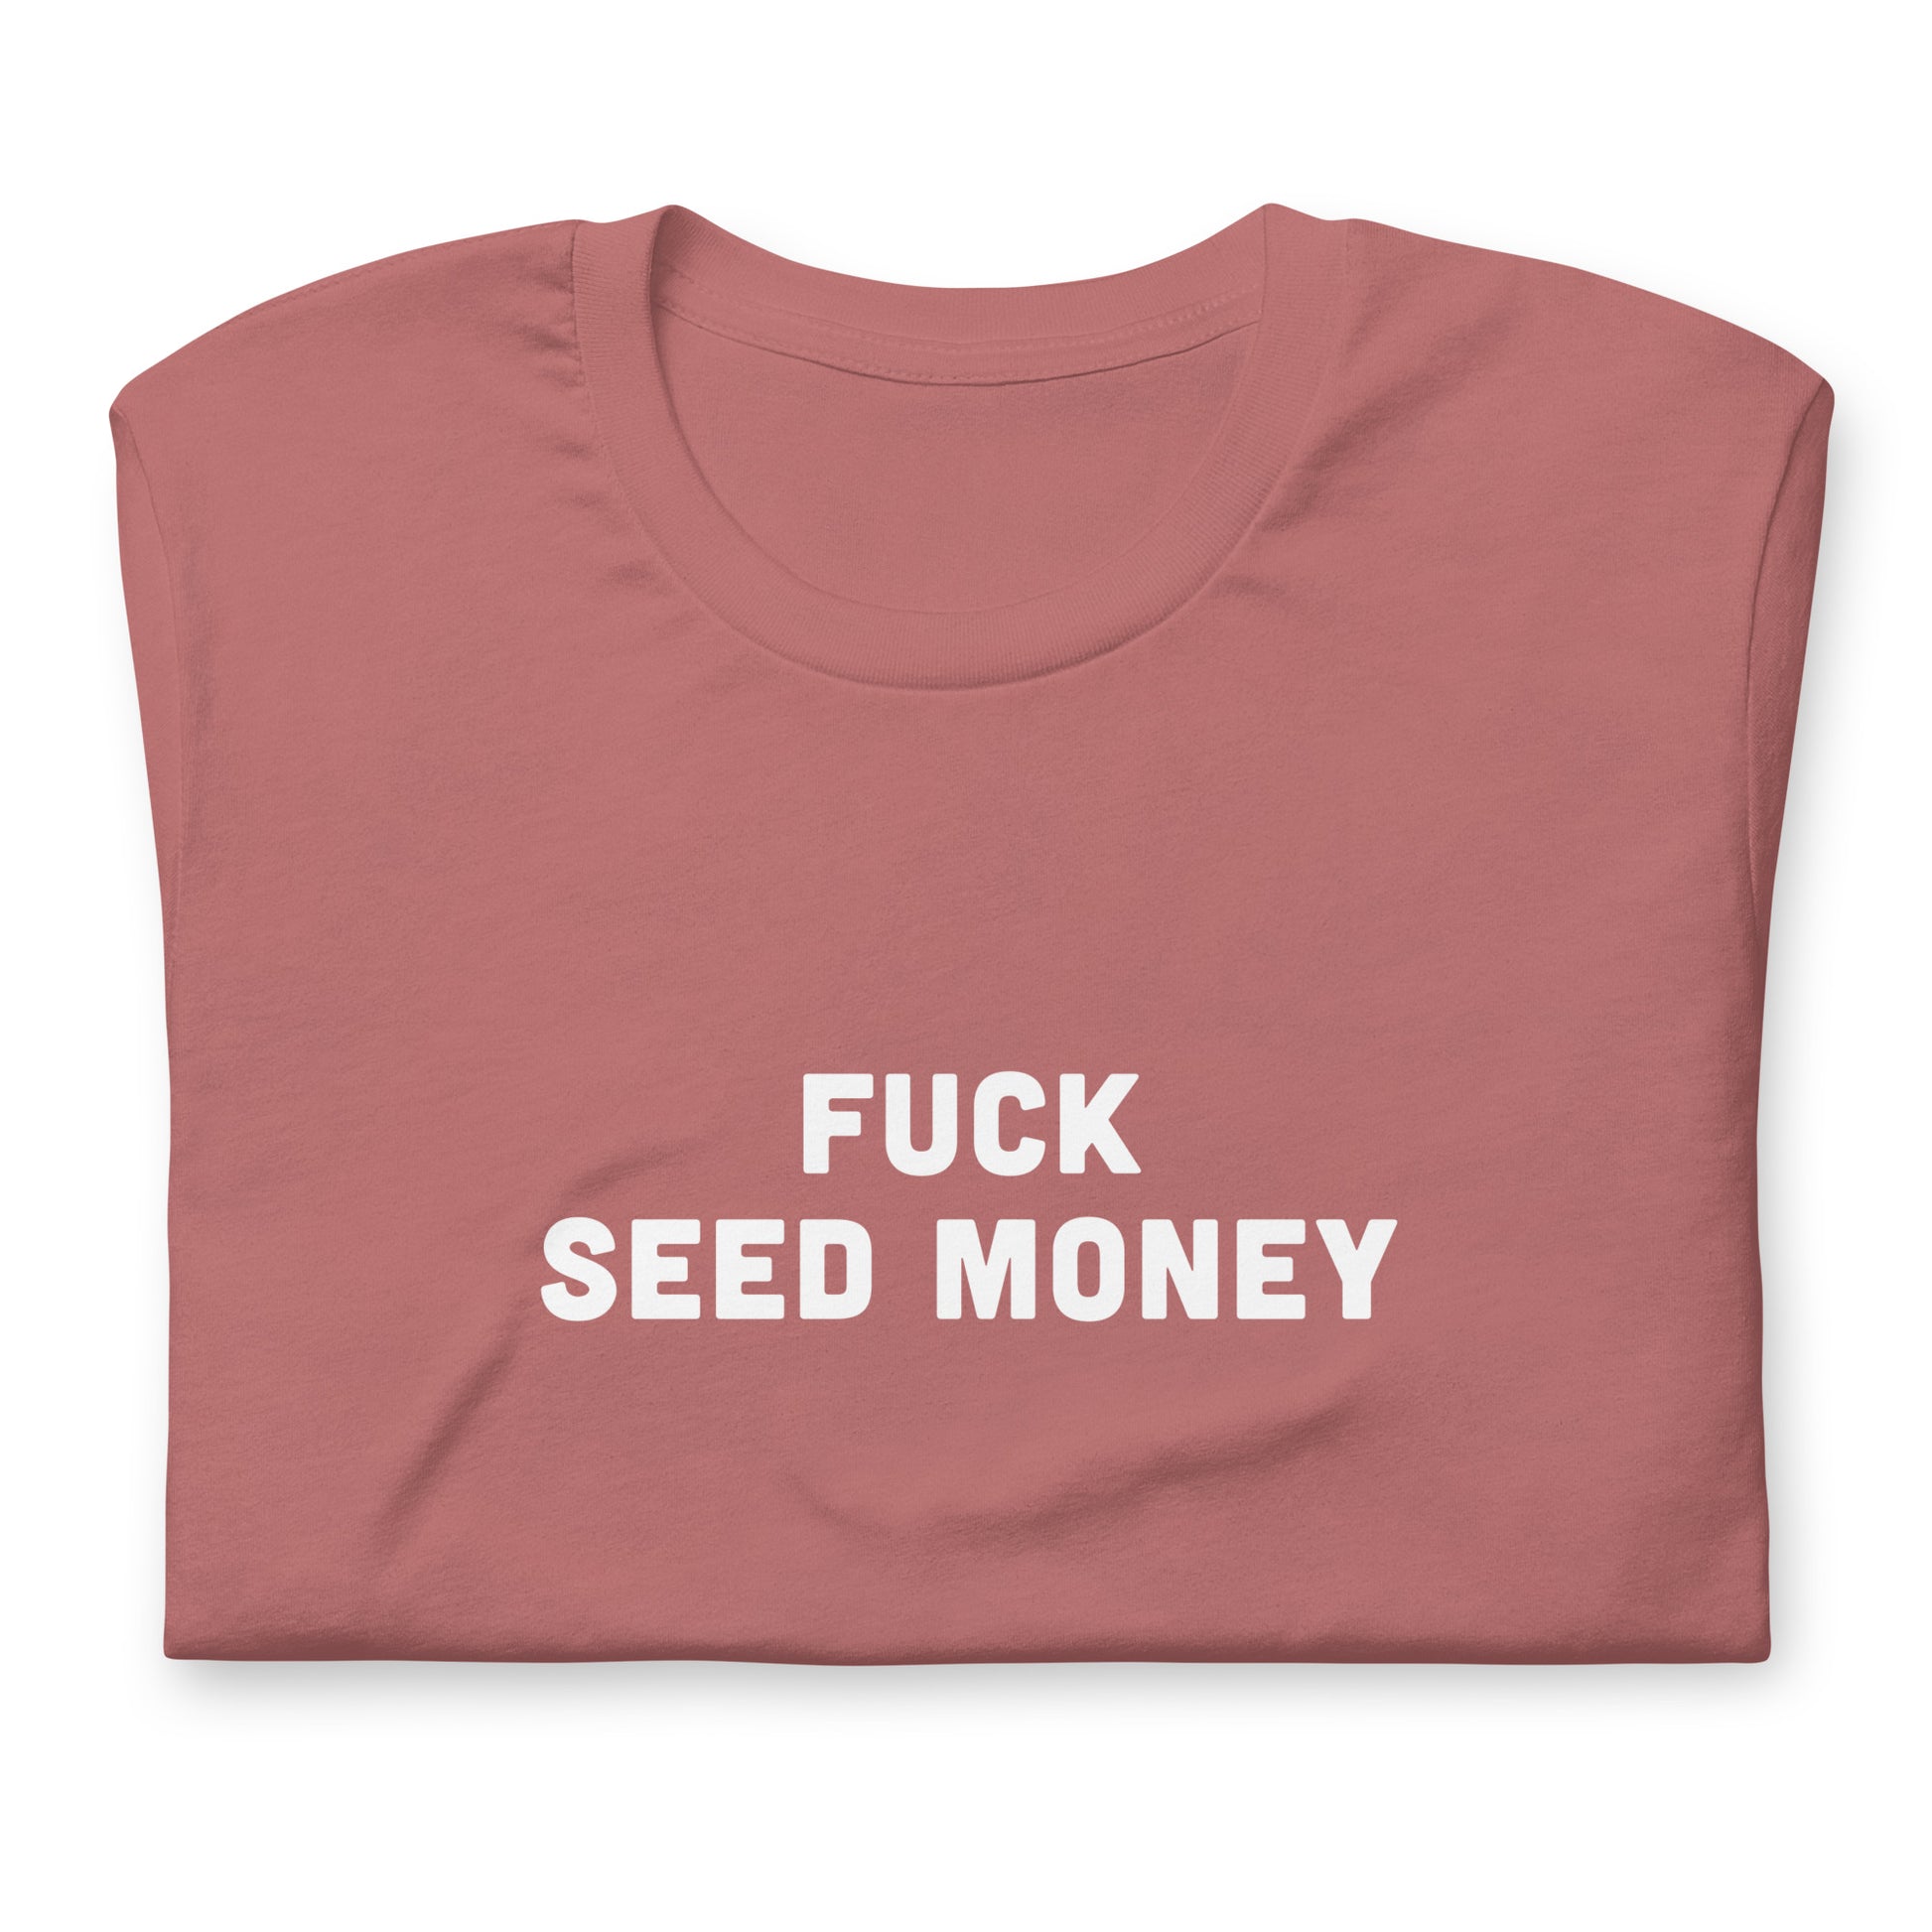 Fuck Seed Money T-Shirt Size XL Color Navy